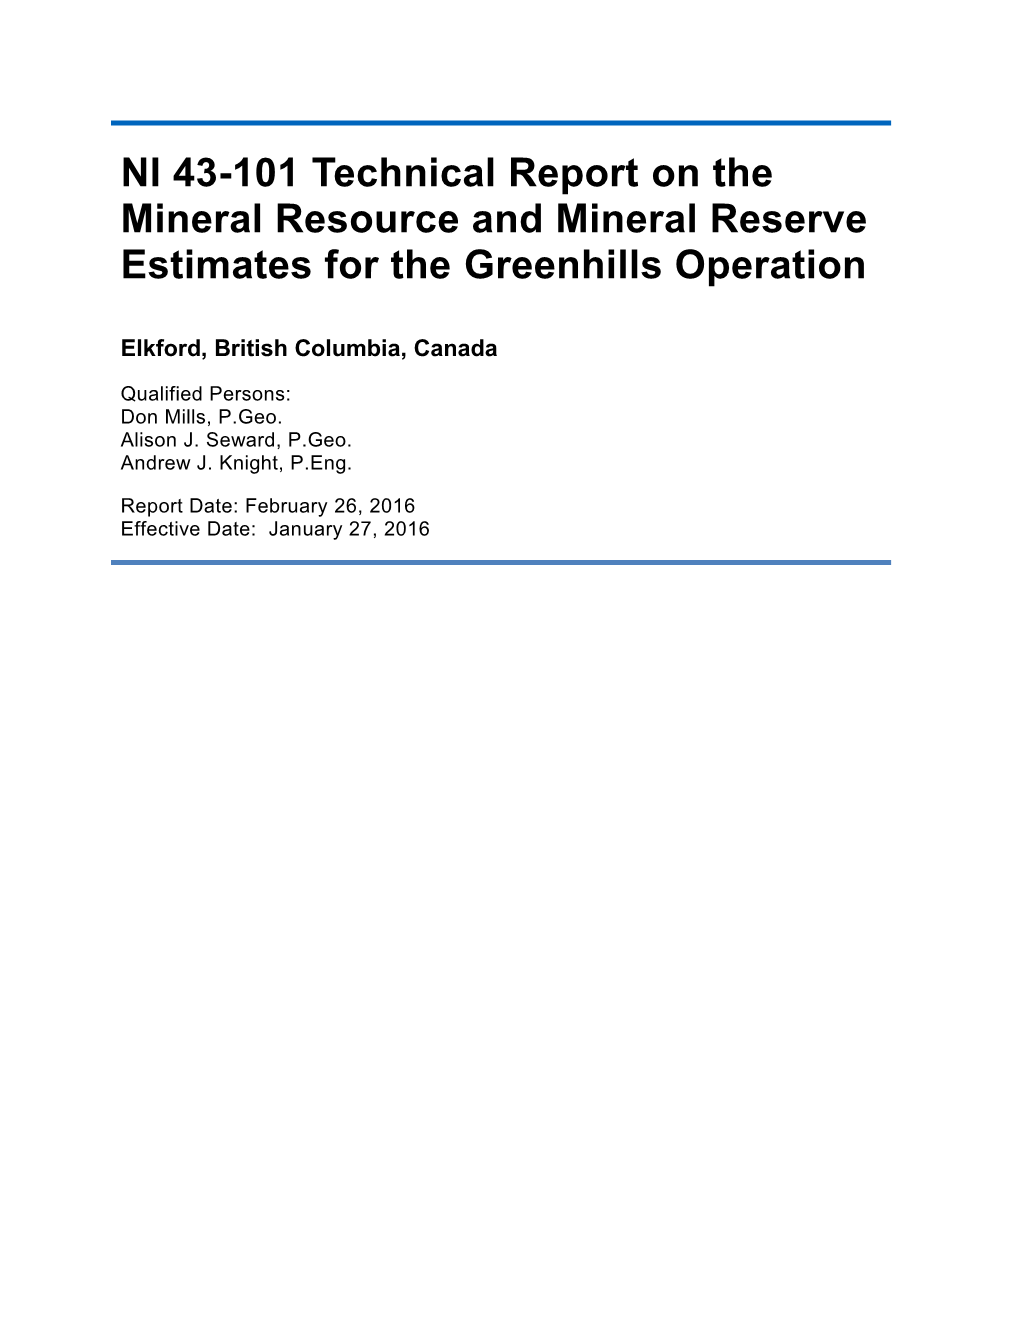 NI 43-101 Technical Report on the Mineral Resource and Mineral Reserve Estimates for the Greenhills Operation